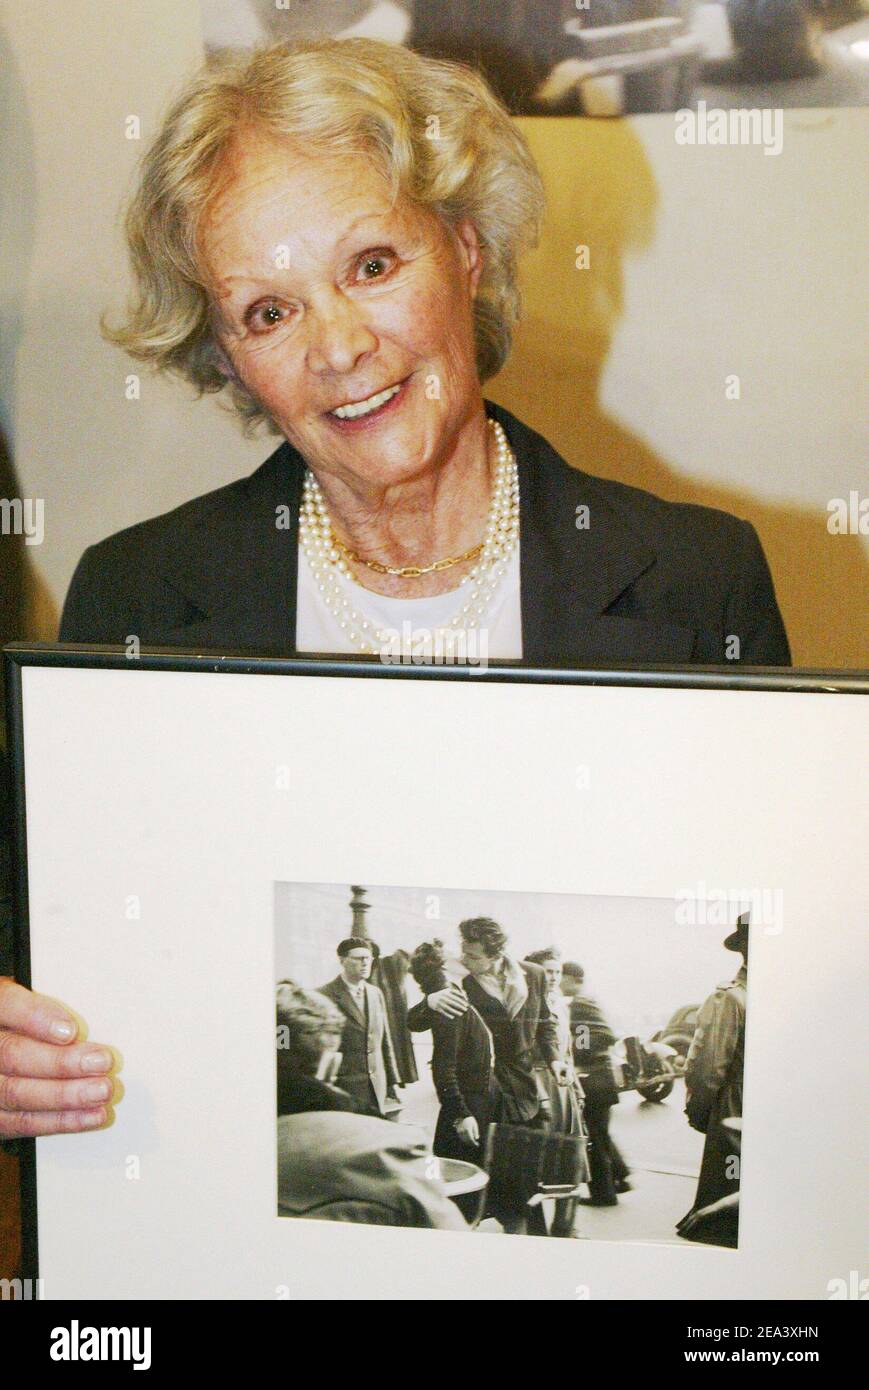 The woman featured in Robert Doisneau's photograph 'The Kiss', Franoise Bornet, poses at the Dassault auction house as an original print of Robert Doisneau's classic photograph 'Baiser de l'Hotel de Ville' (Kiss at City Hall) has been sold 155.000 Euros during an auction of a photography sale in Paris, France, on April 25, 2005. Photo by Mehdi Taamallah/ABACA. Stock Photo